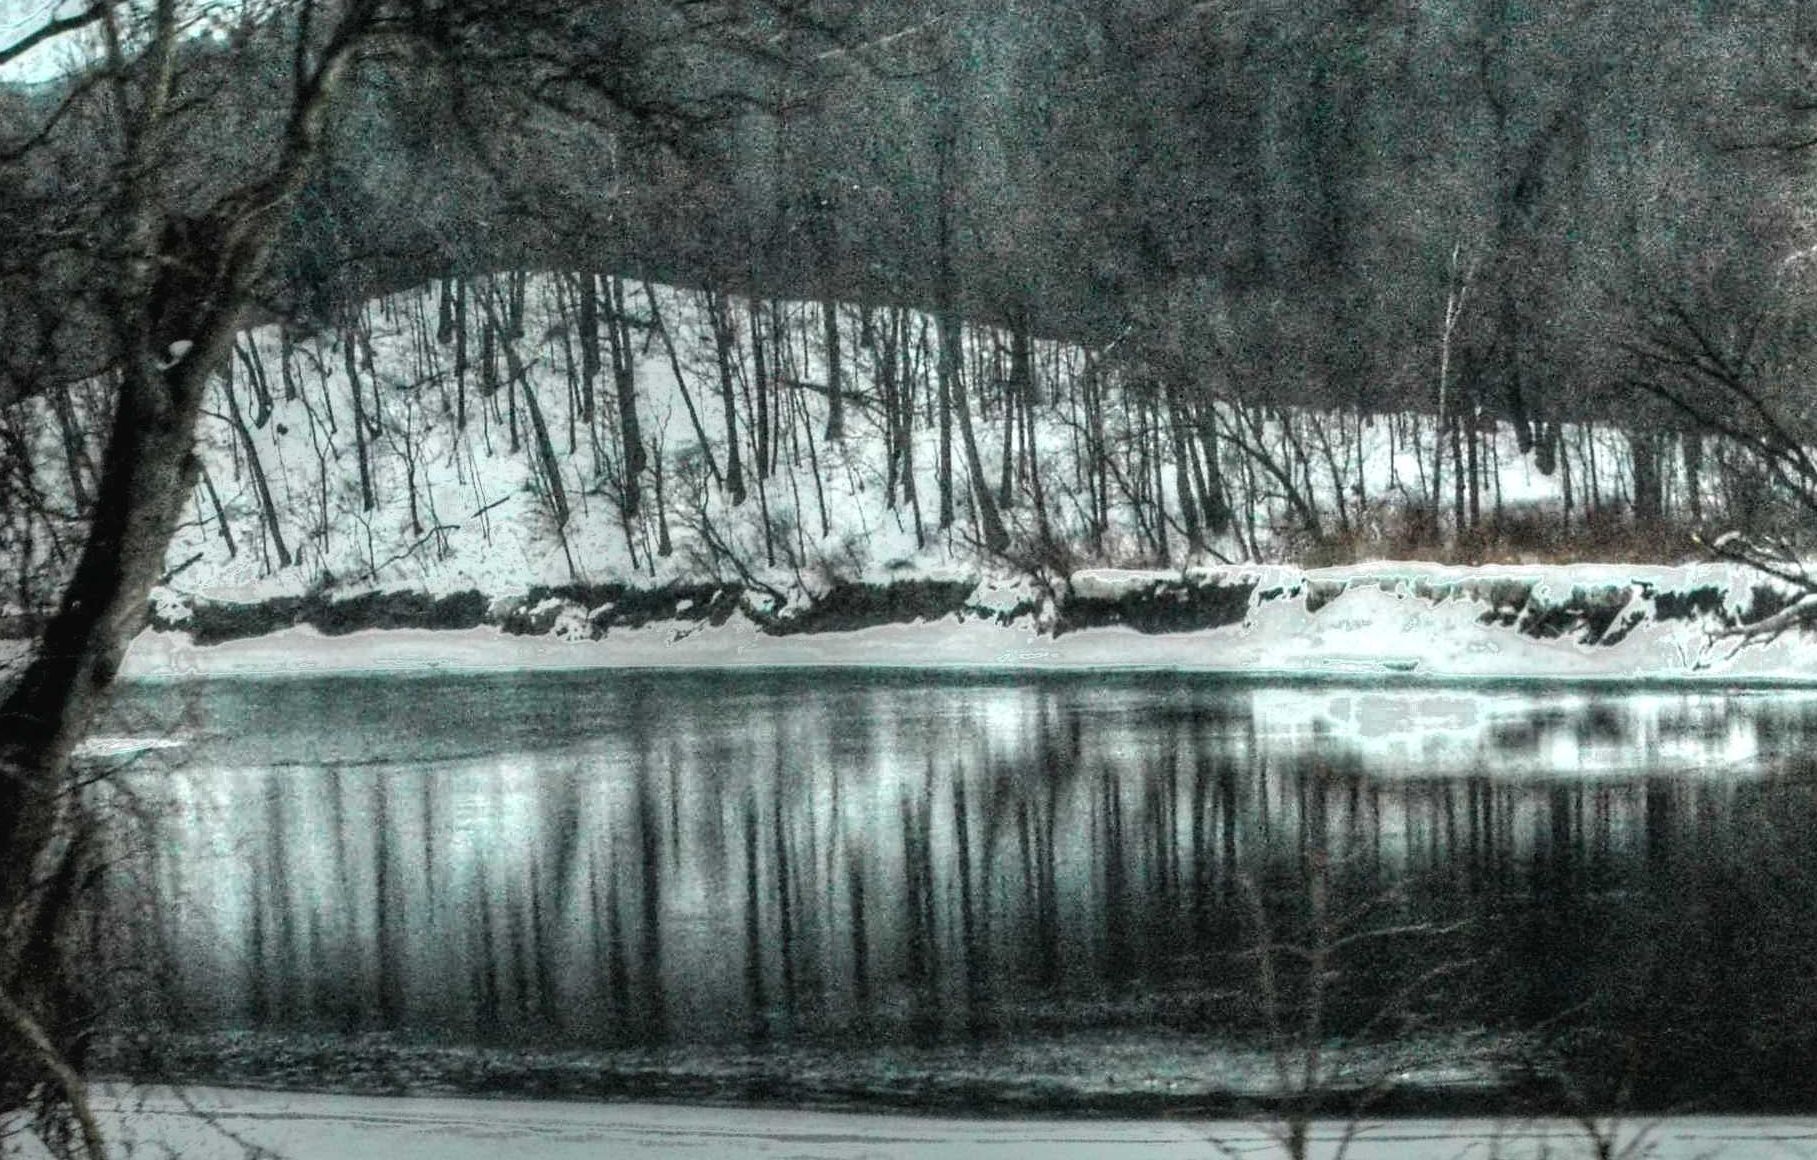 Reflections on the Susquehanna River 2/19/14 | Outdoors | Pinterest ...